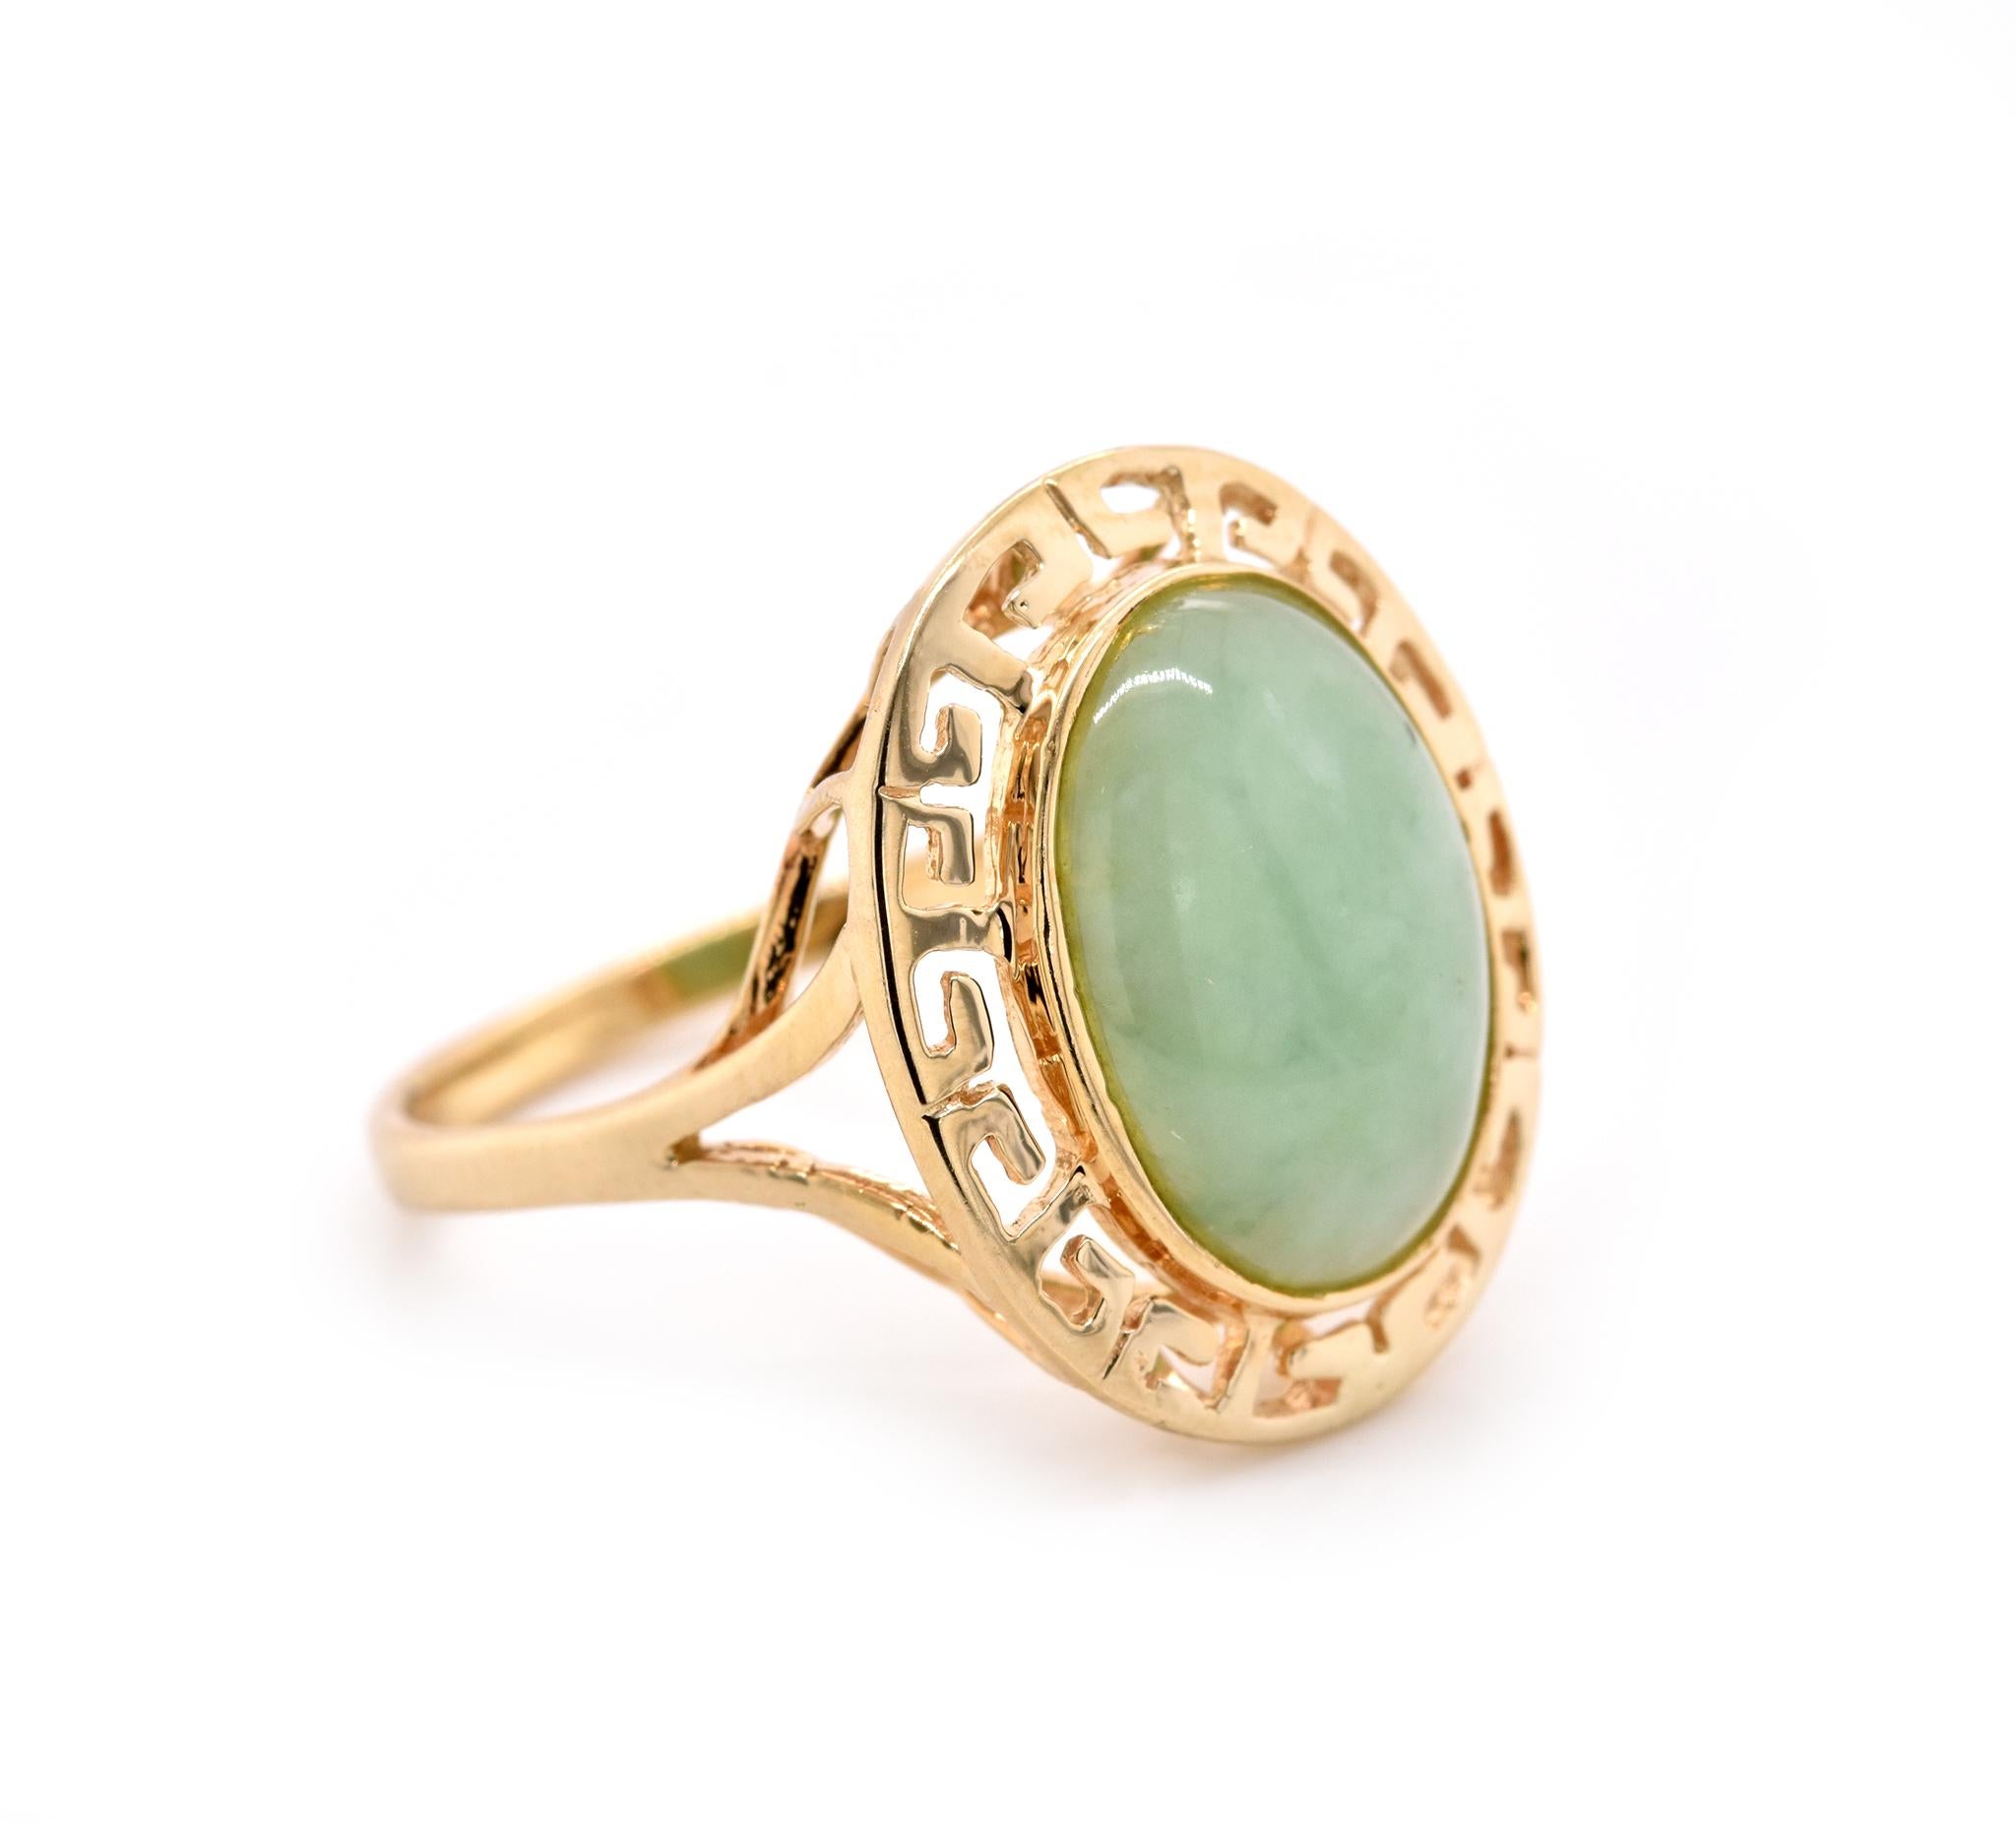 Designer: custom 
Material: 14K yellow gold
Gemstone: Jade 
Ring Size: 7.5
Dimensions: ring is 19mm X 16mm
Weight: 3.96 grams
